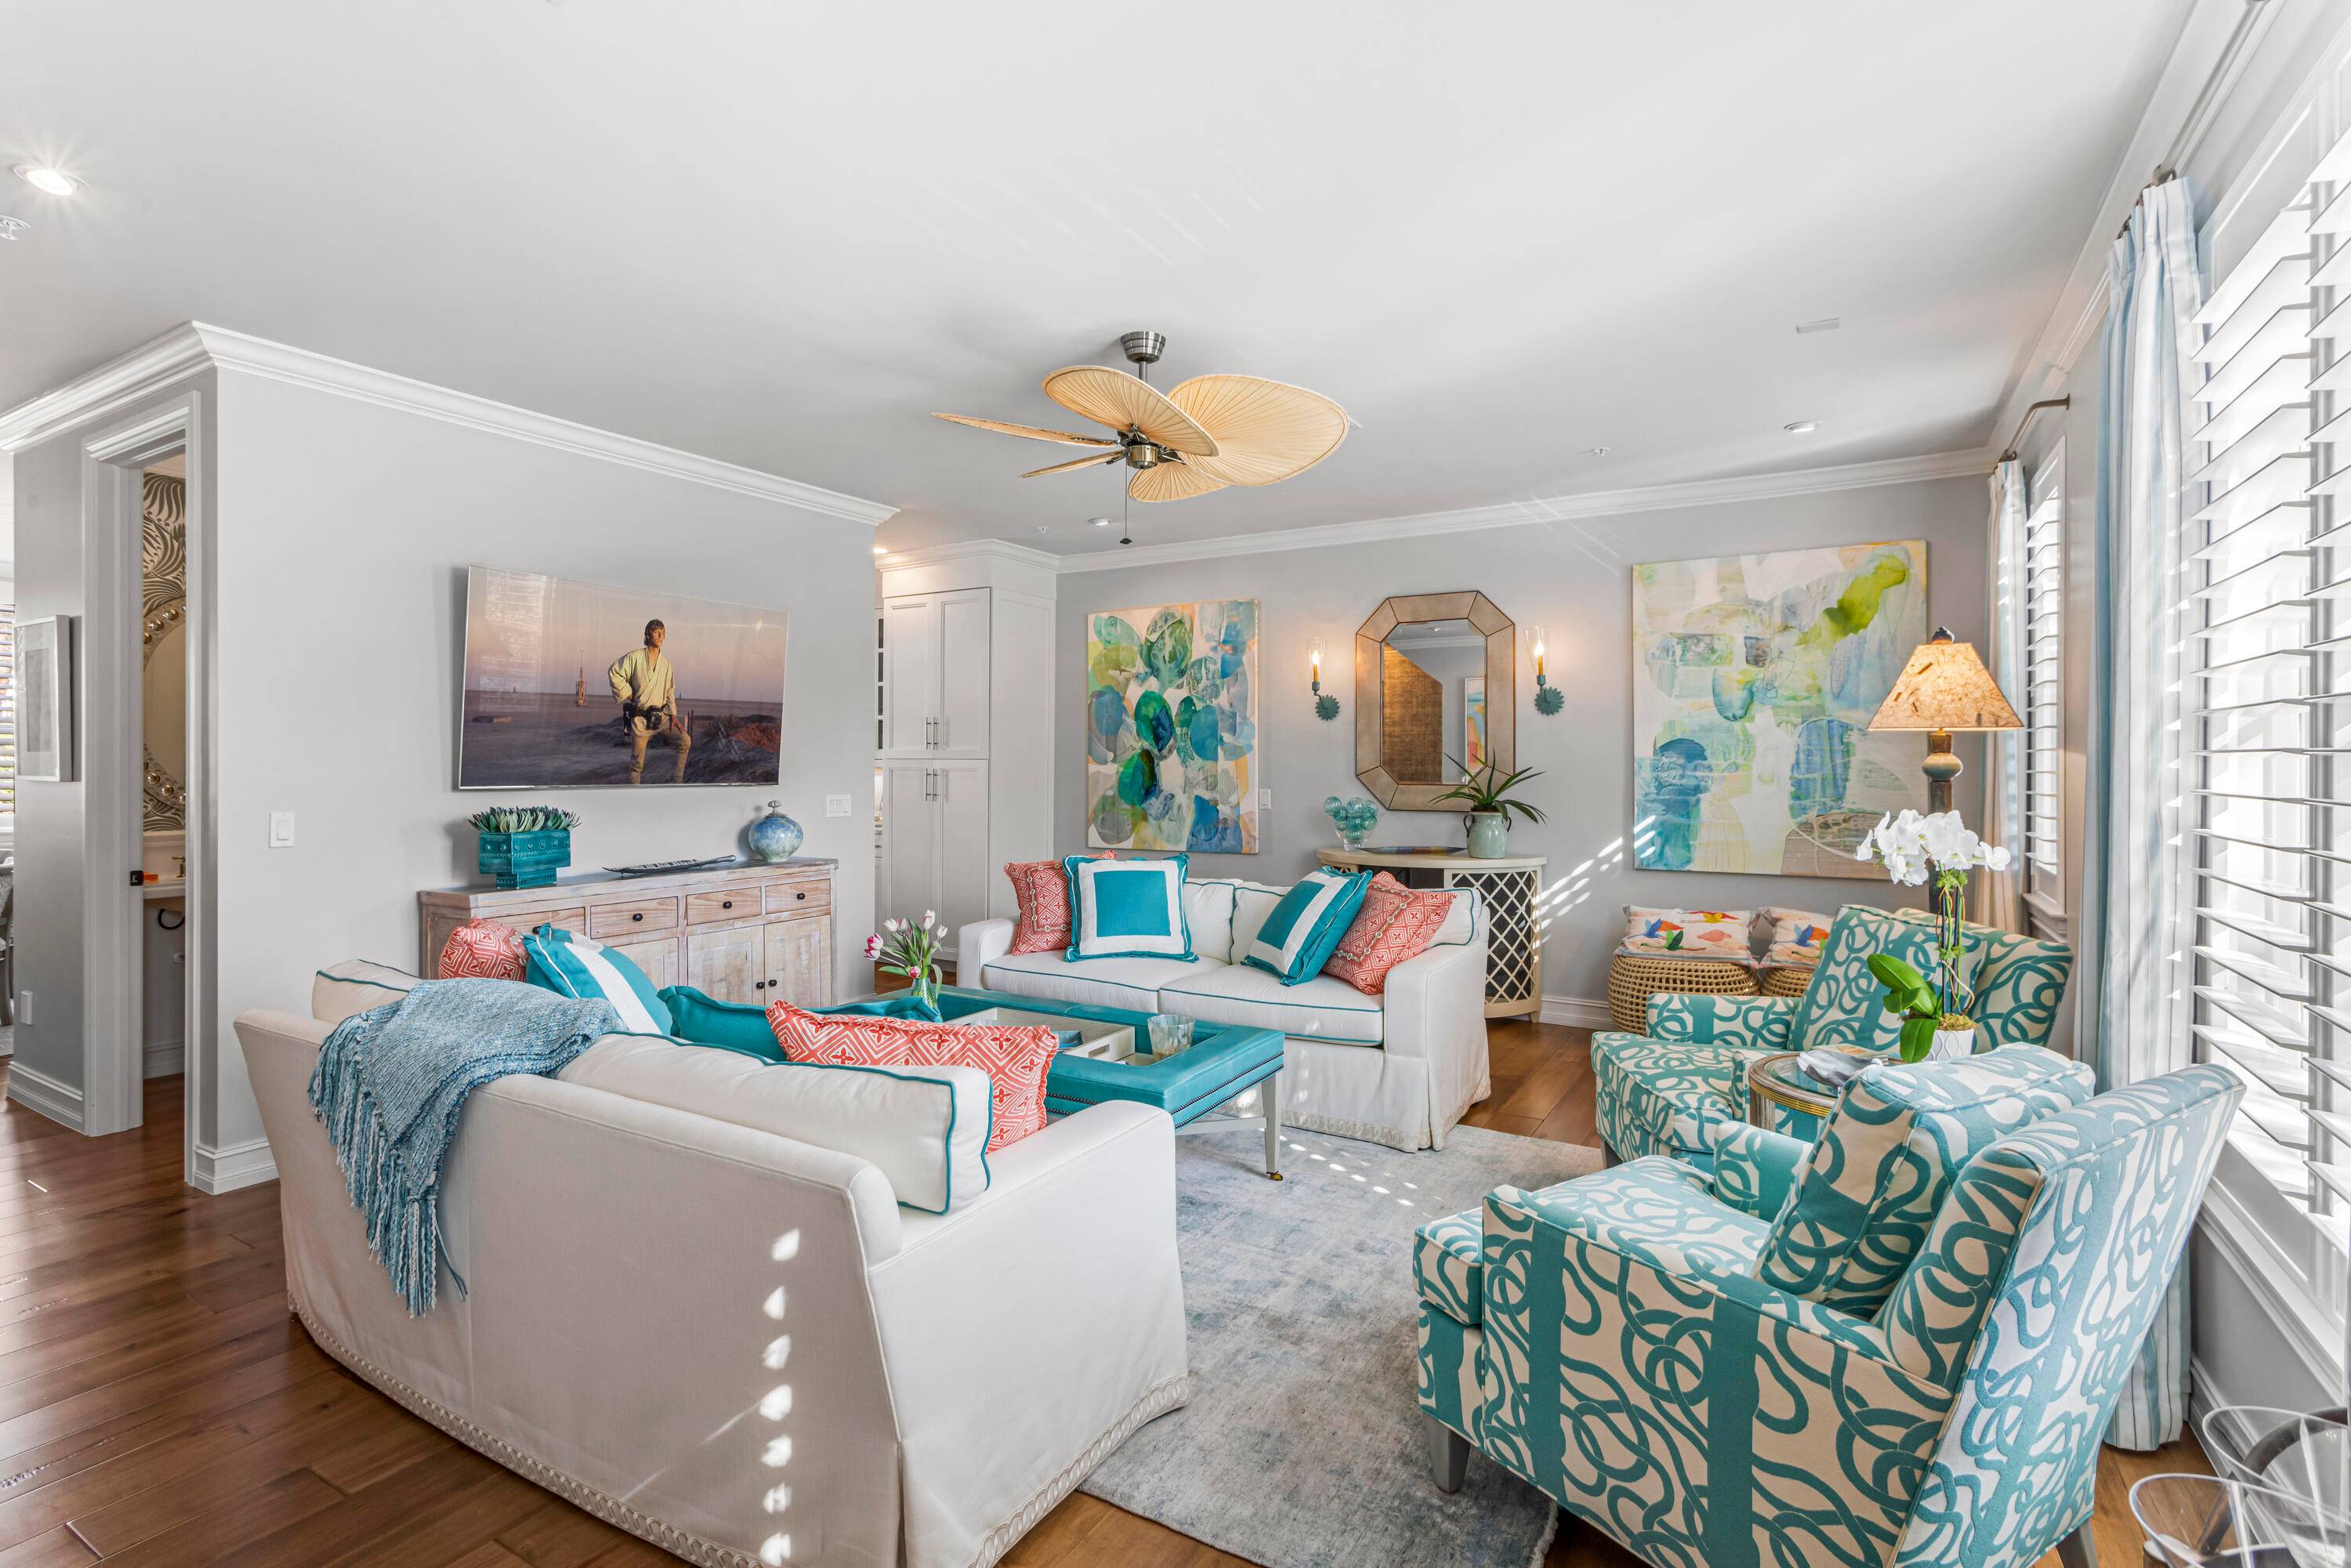 Offering intown living at its finest just a few blocks north of vibrant Downtown Delray Beach, this luxury three bedroom Cannery Row townhome residence features high ceilings and beautiful designer ...